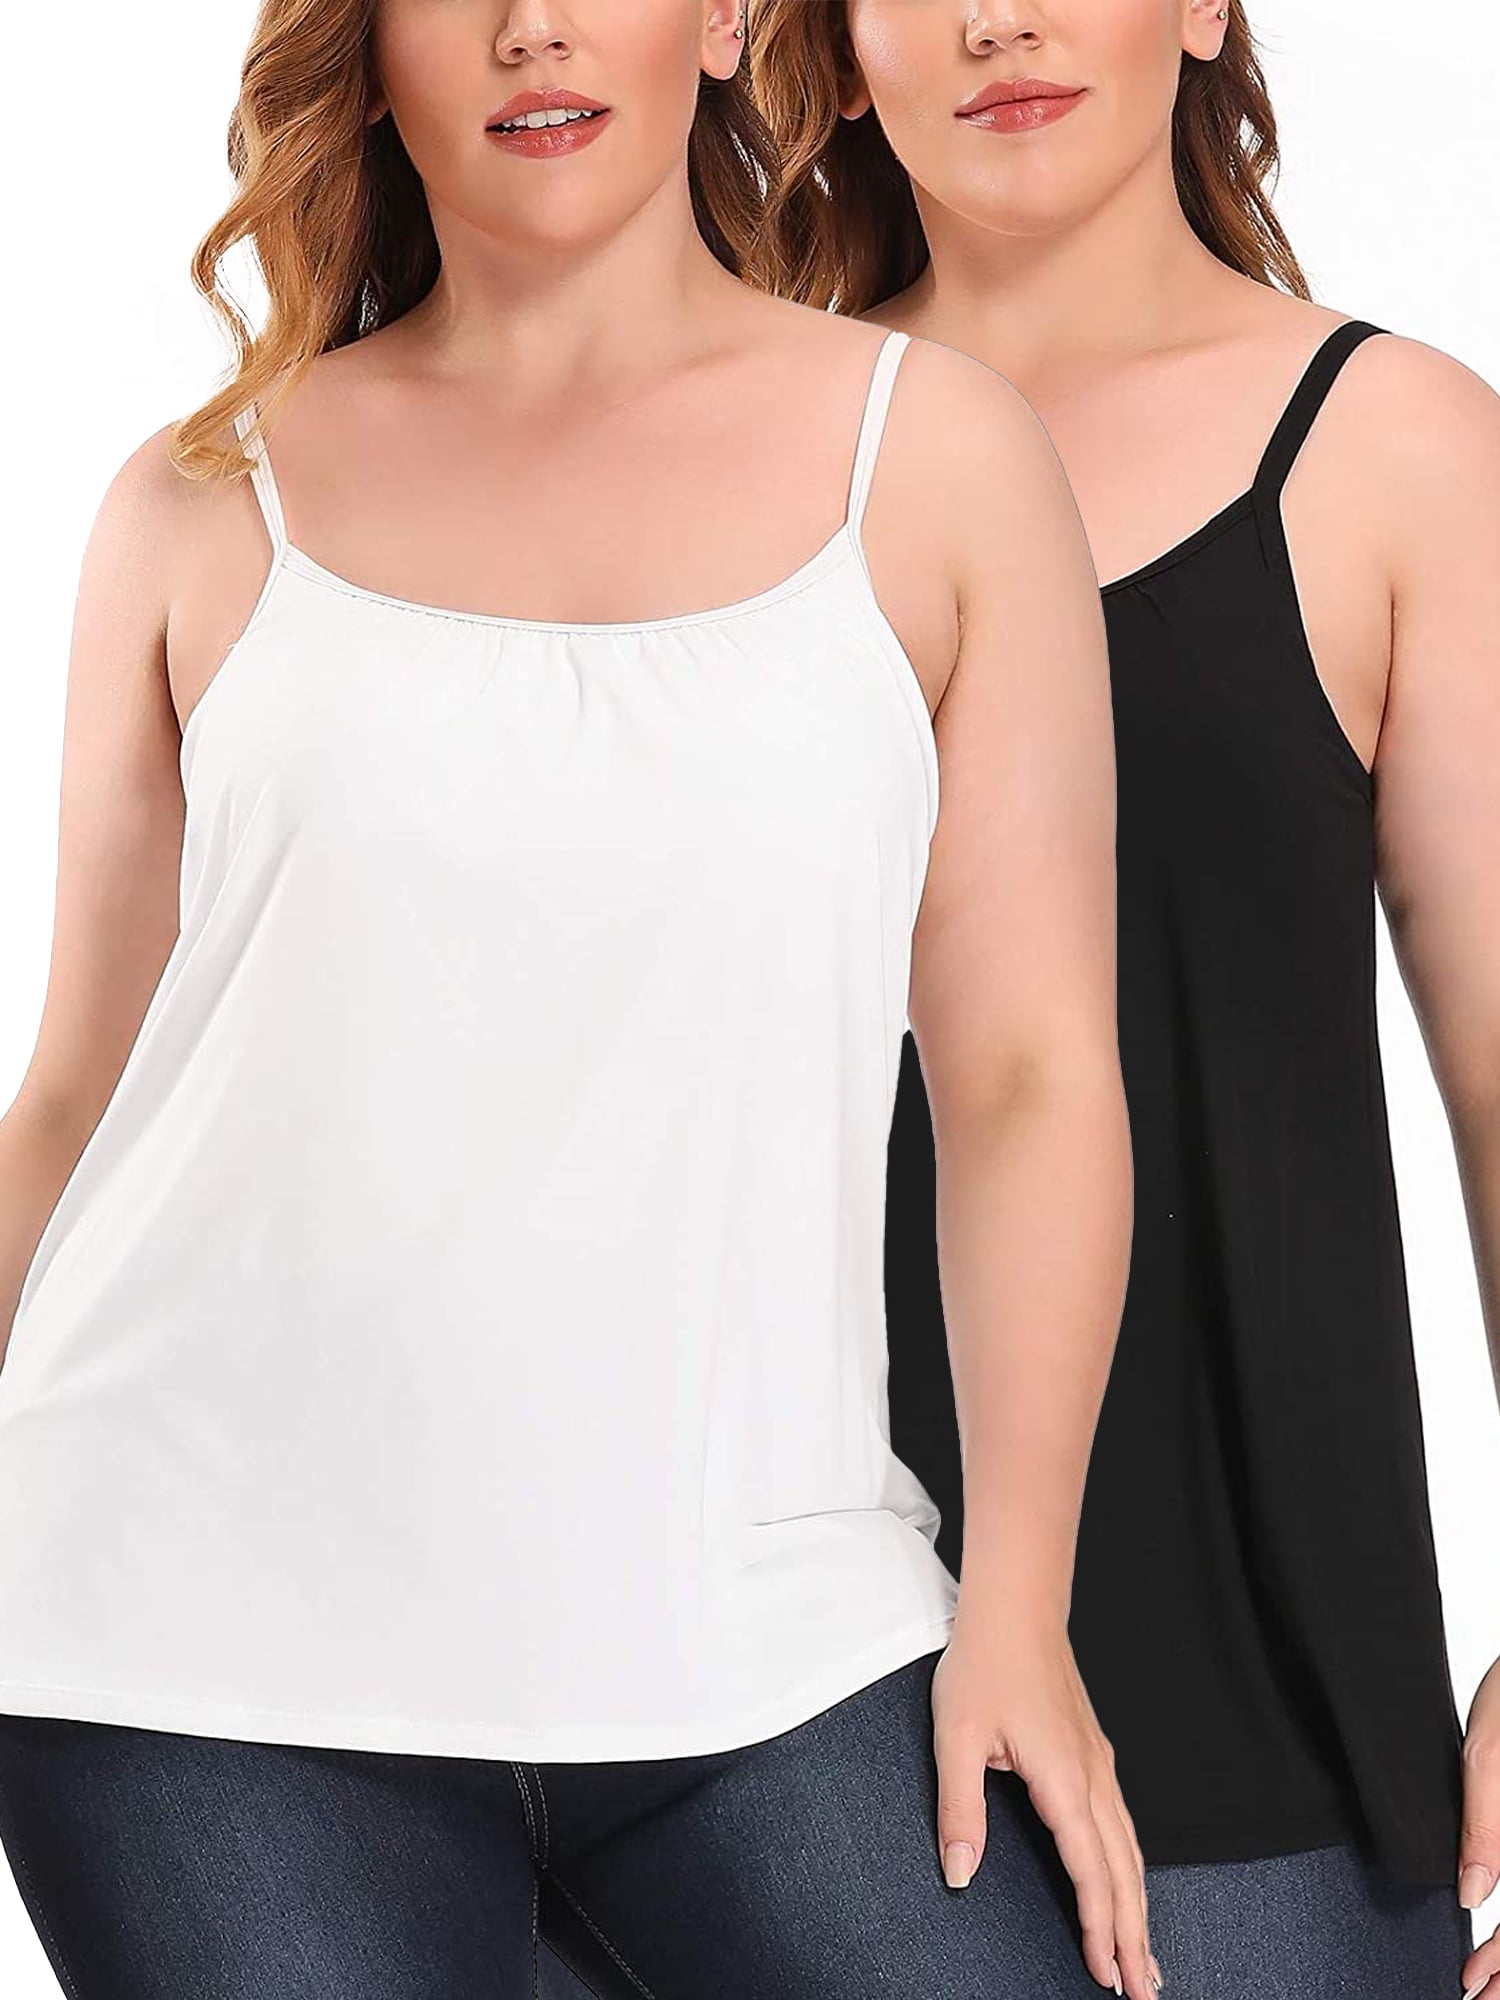 FITVALEN Women's Camisole with Built in Bra Plus Size Casual Loose Tank  Tops Sleeveless Shirts Adjustable Straps (S-4XL）